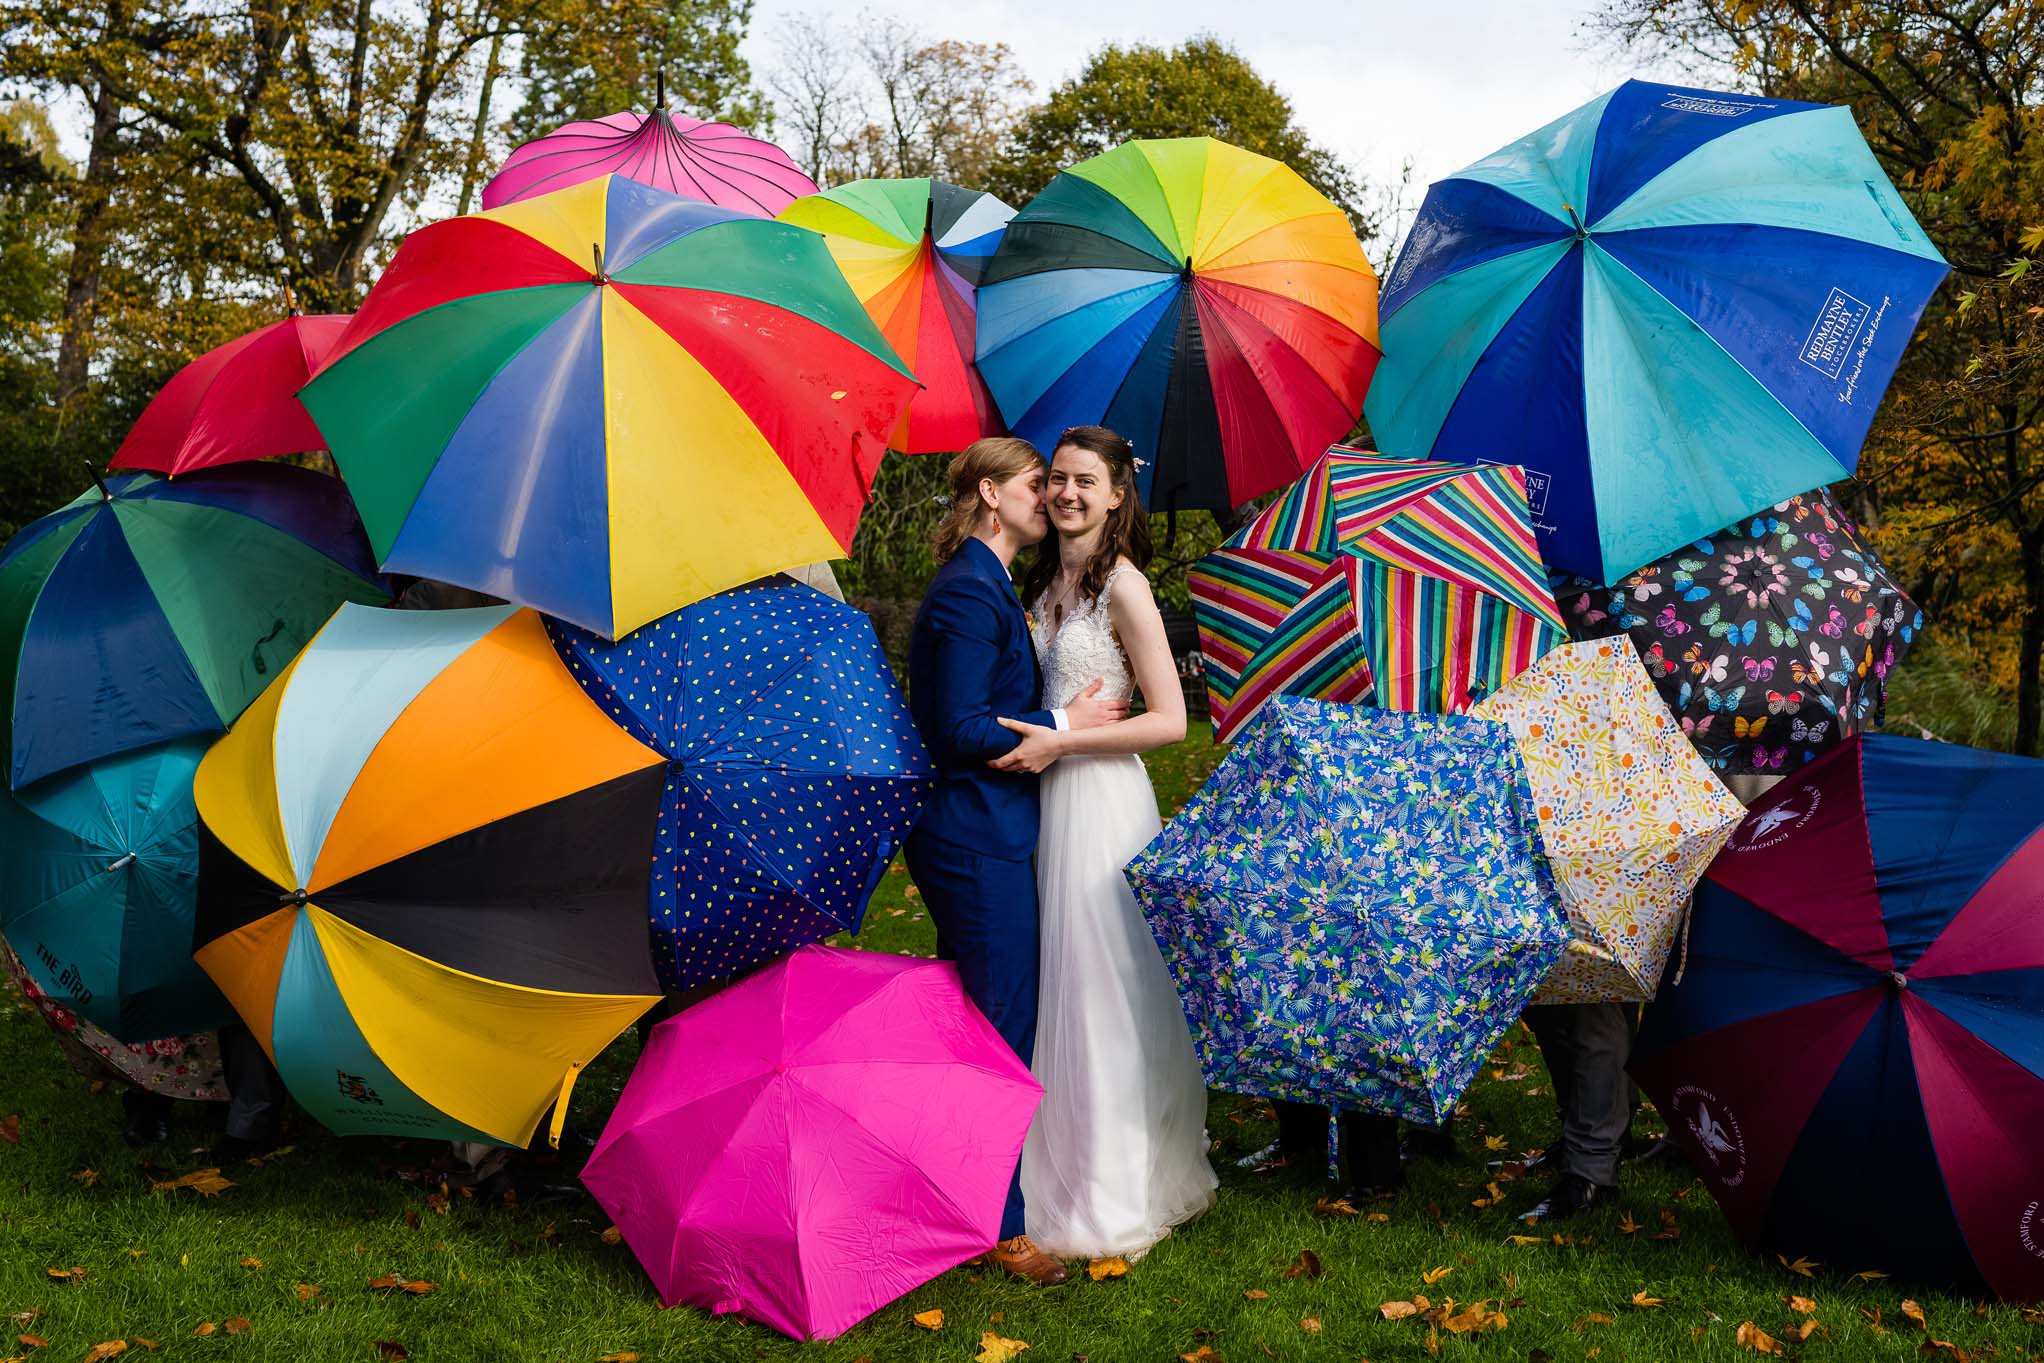 Wedding couple surrounded by colourful umbrellas